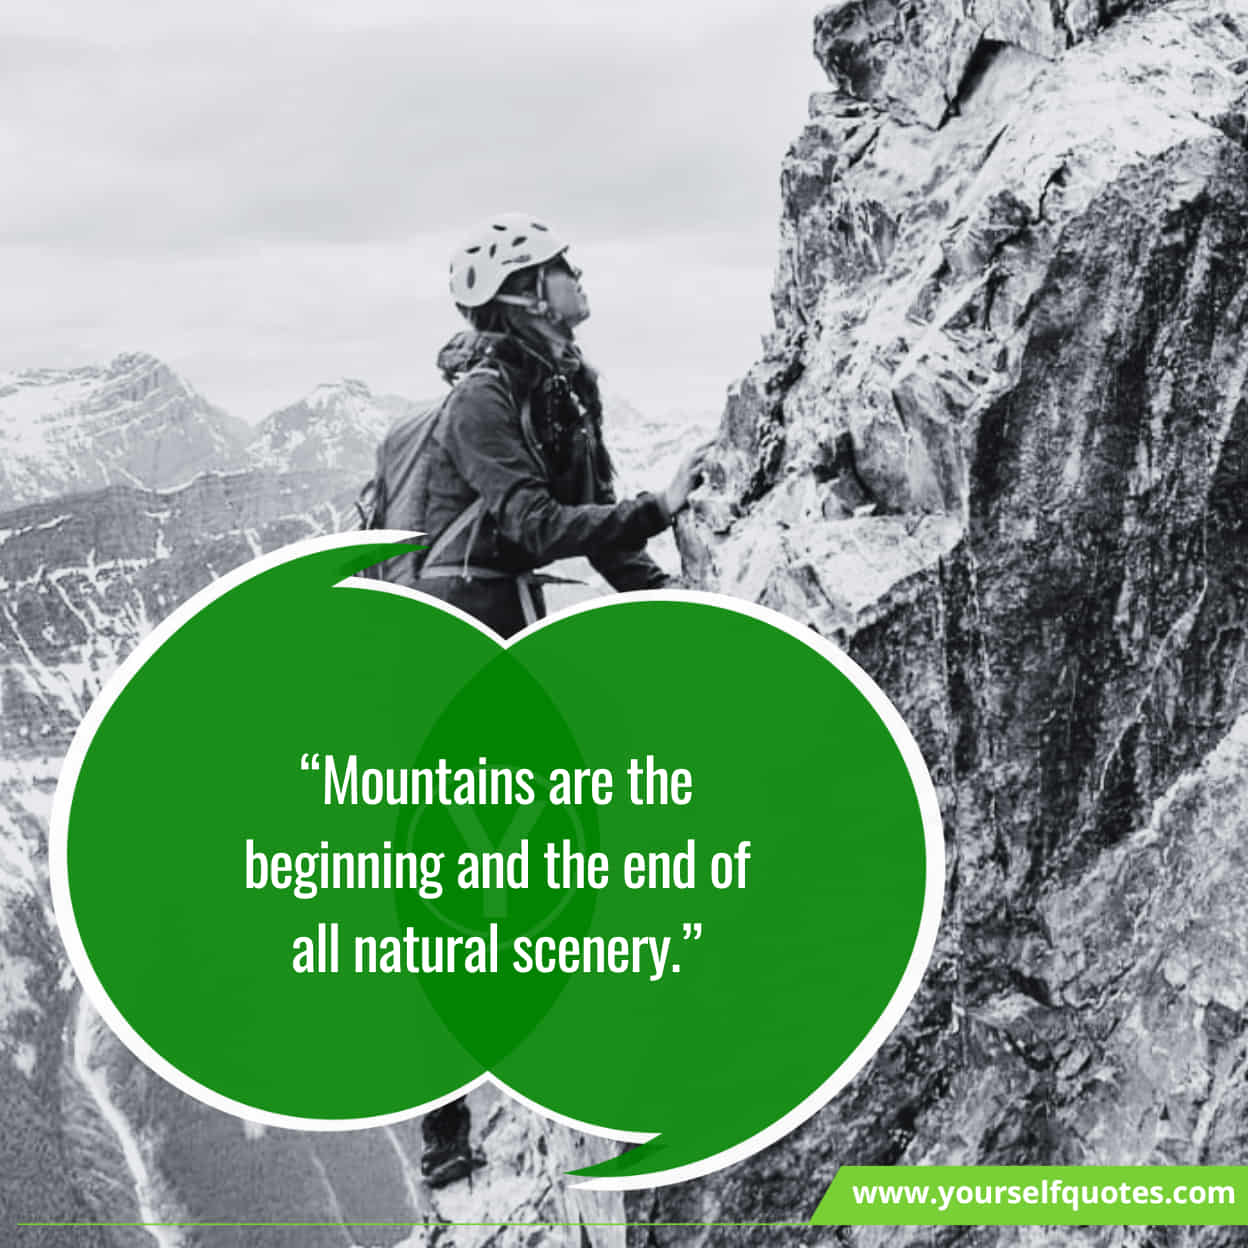 International Mountain Day Quotes